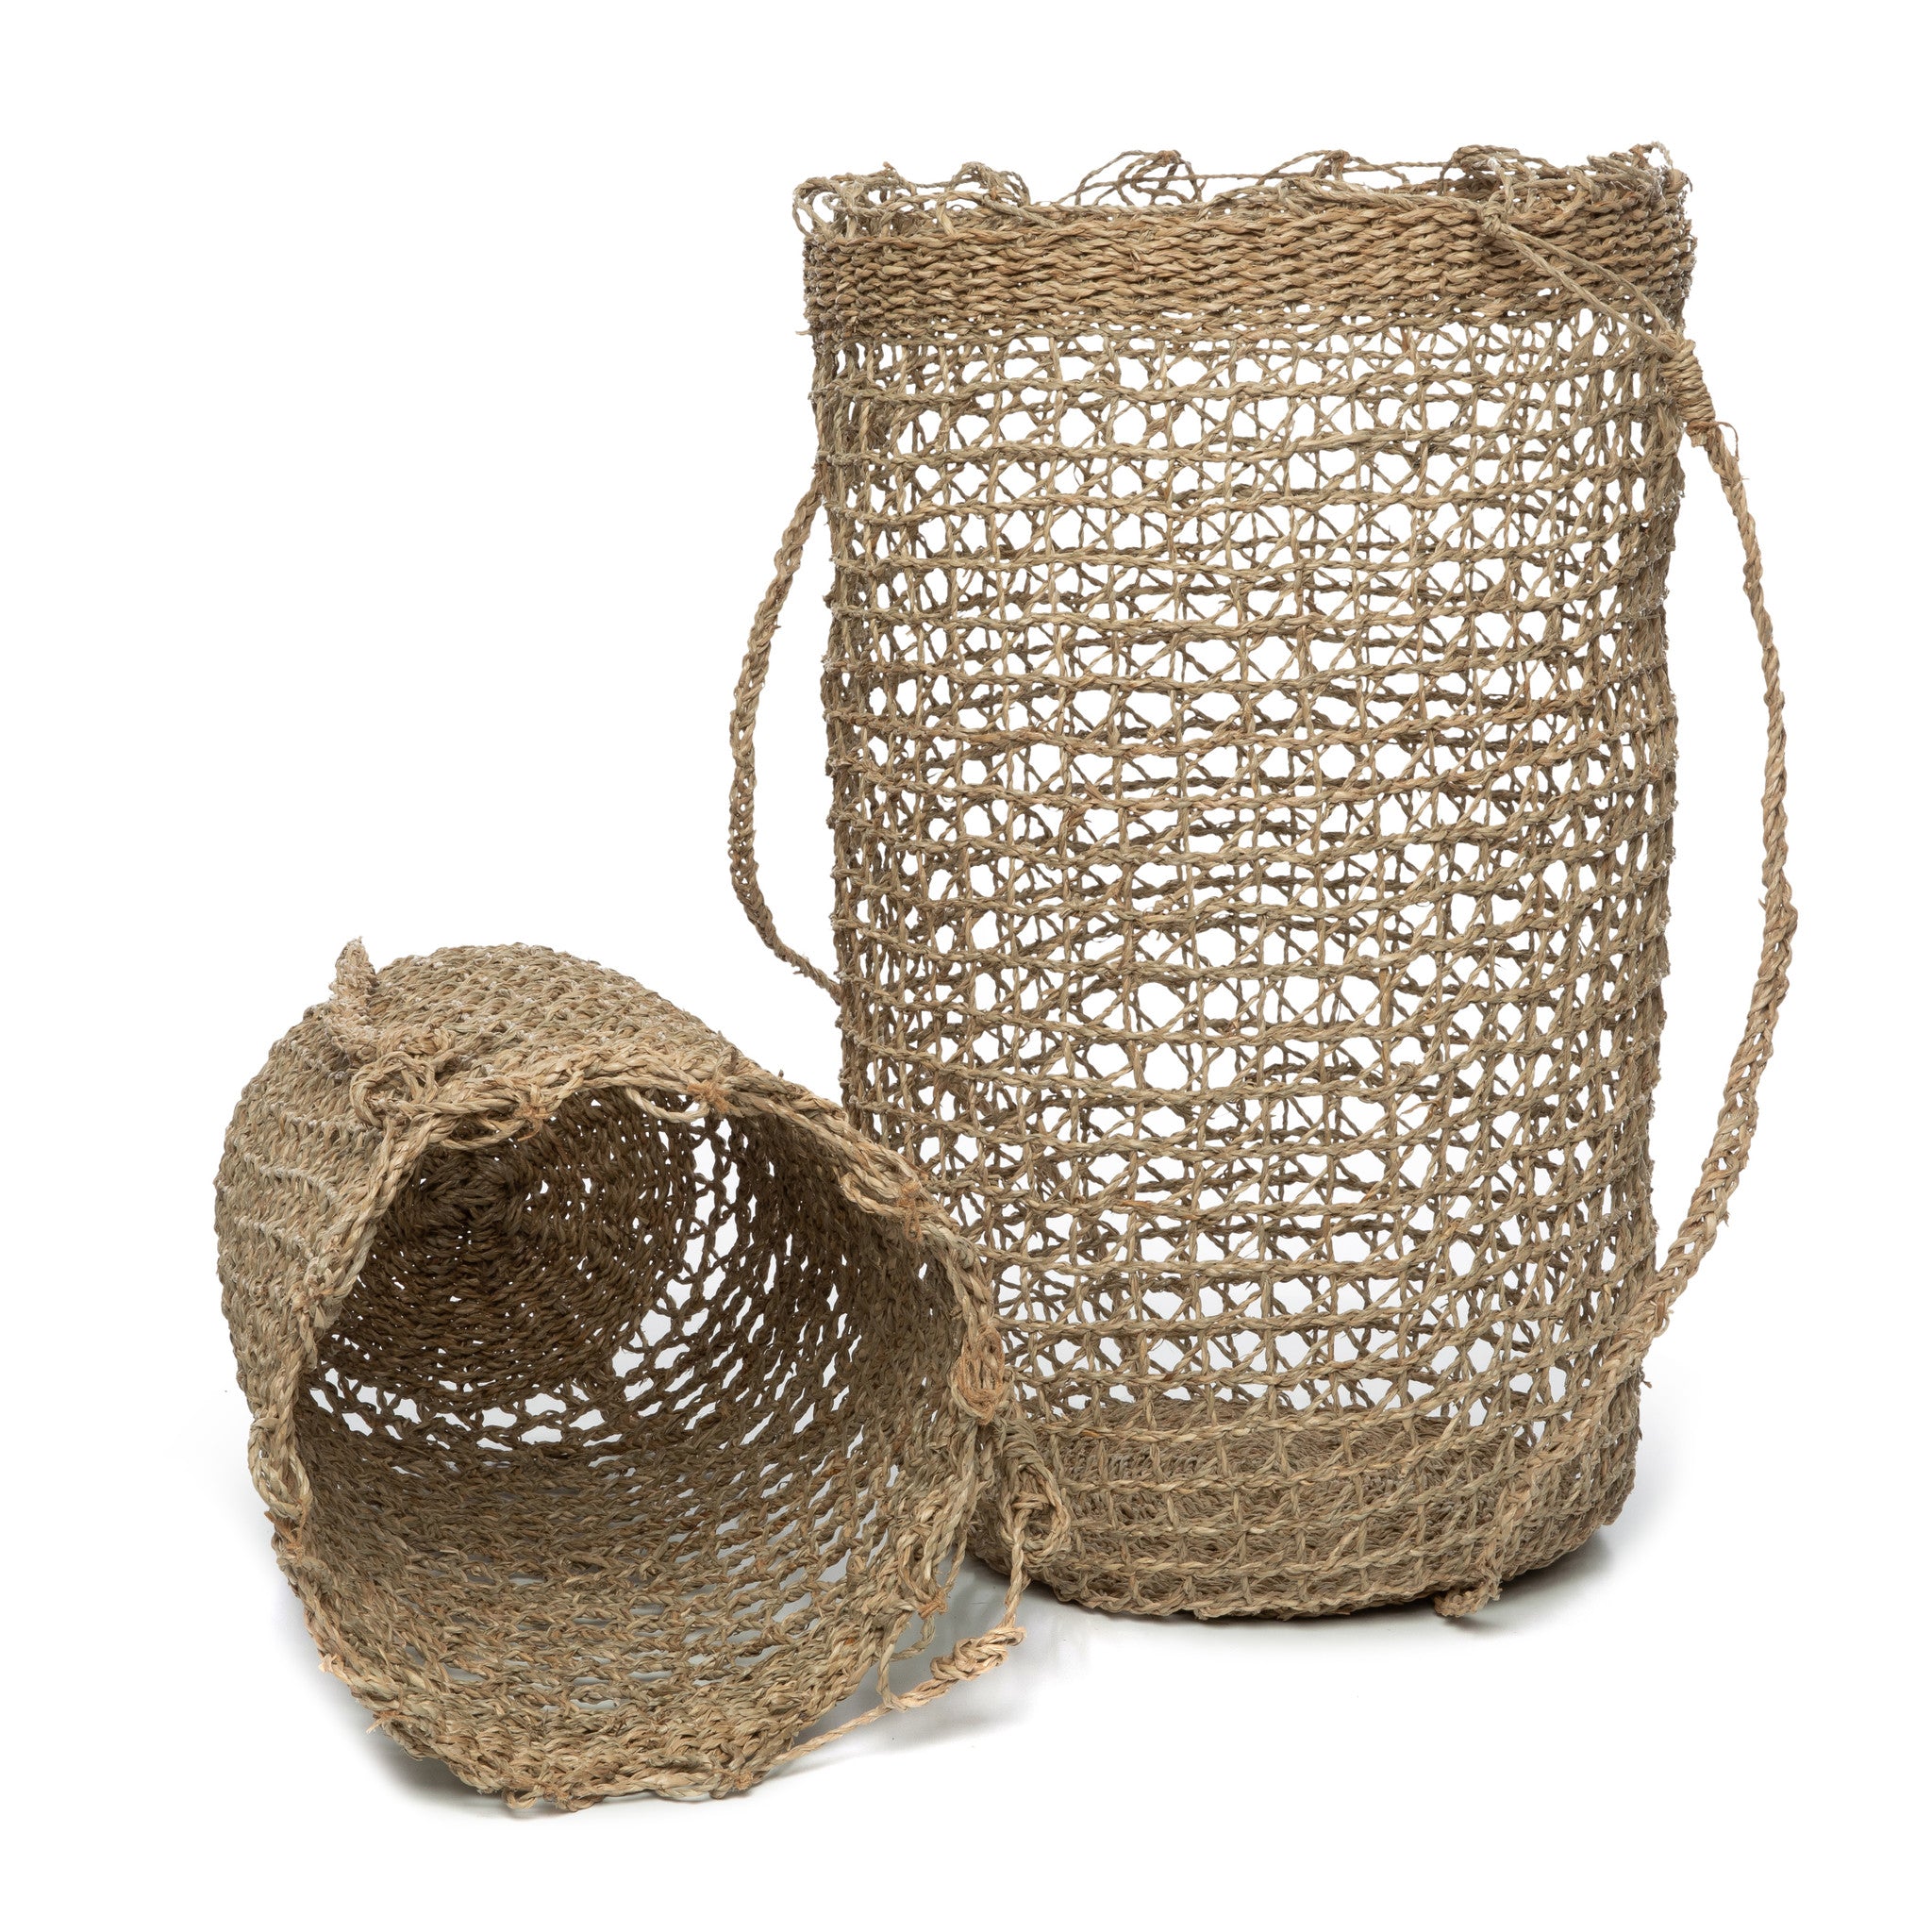 THE FISHERMAN Baskets Set of 2 FRONT VIEW